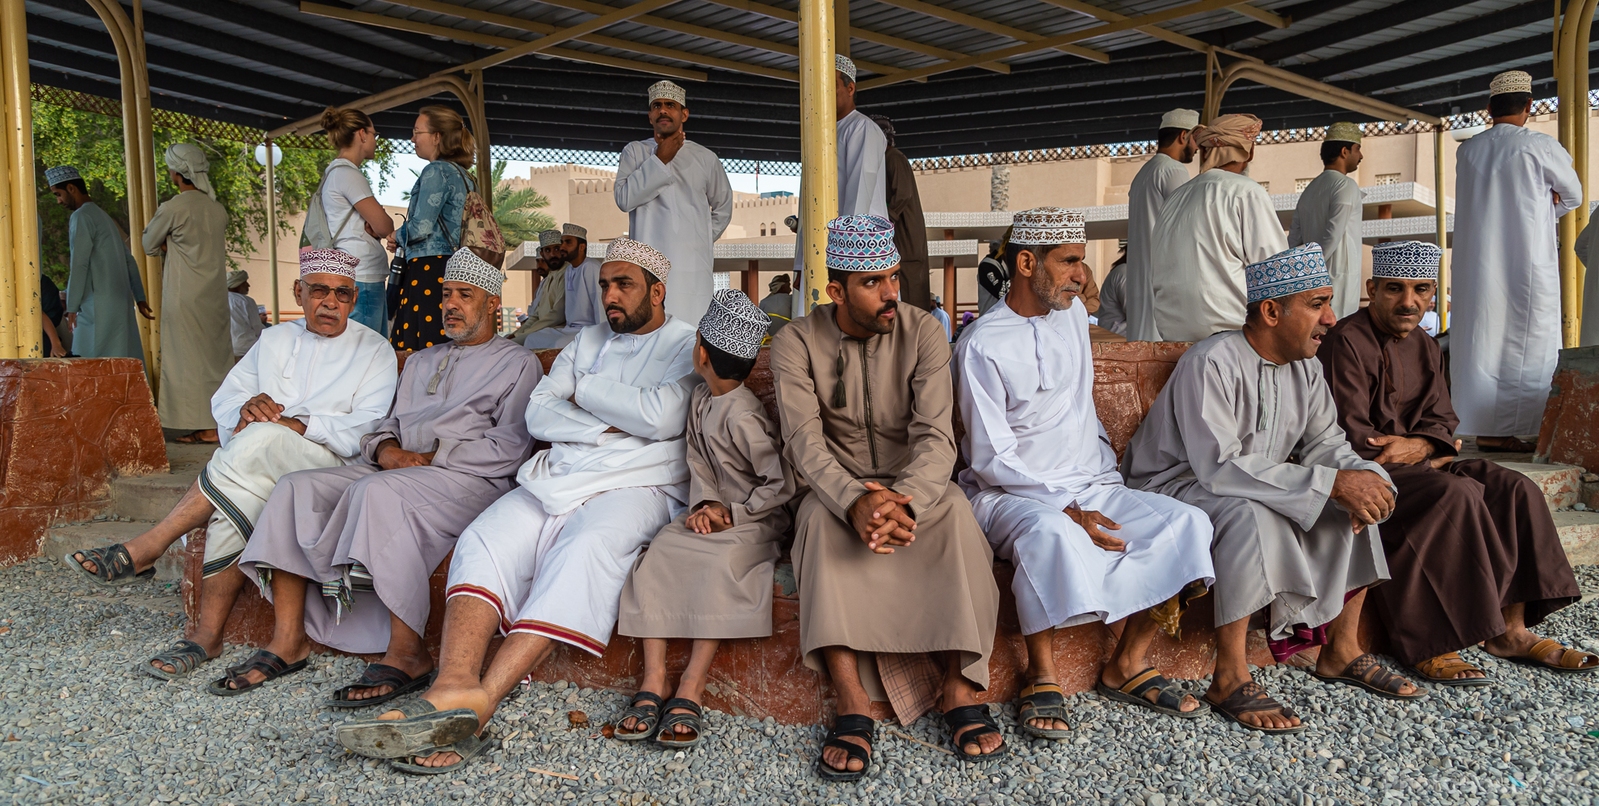 Image of The Goat Market in Nizwa, Oman by Sue Wolfe